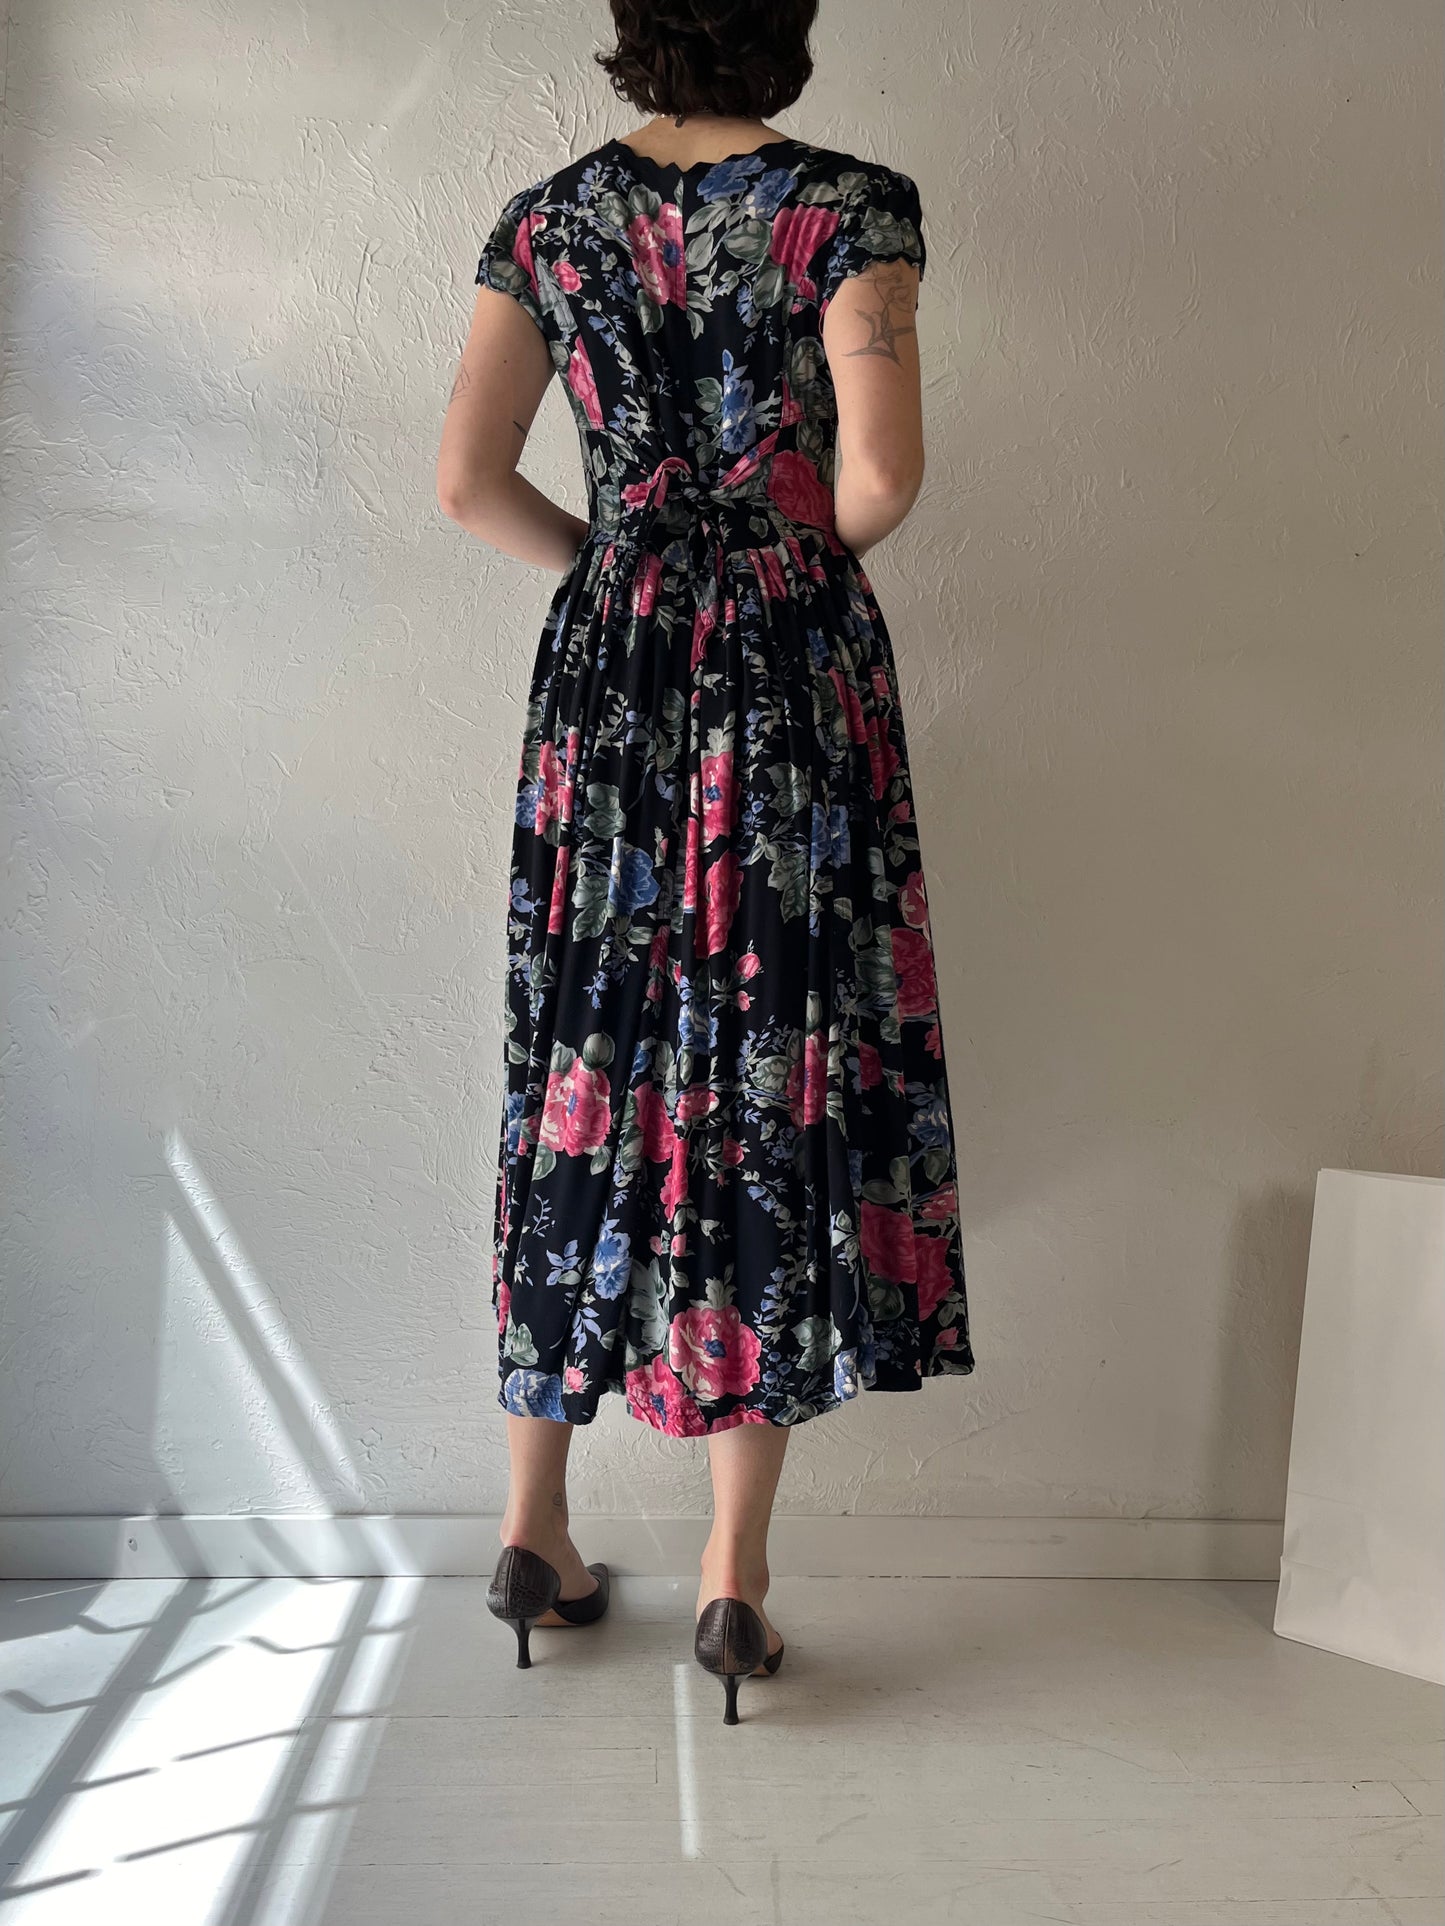 90s 'Europa' Floral Print Rayon Dress / Small